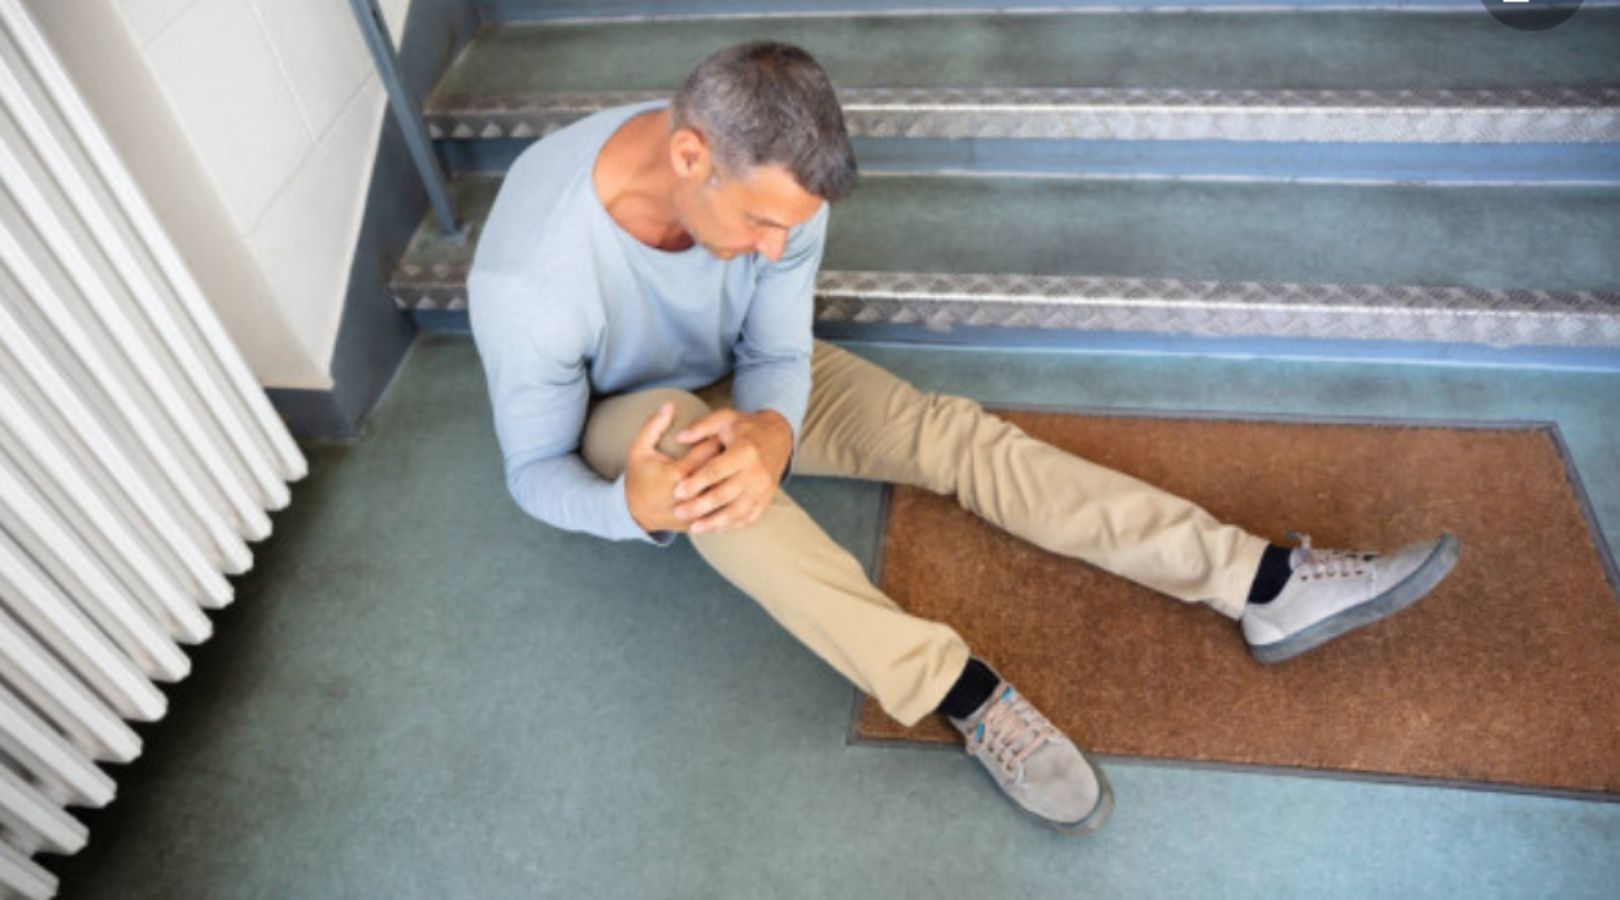 How To Deal With A Slip And Fall Injury At Your Business